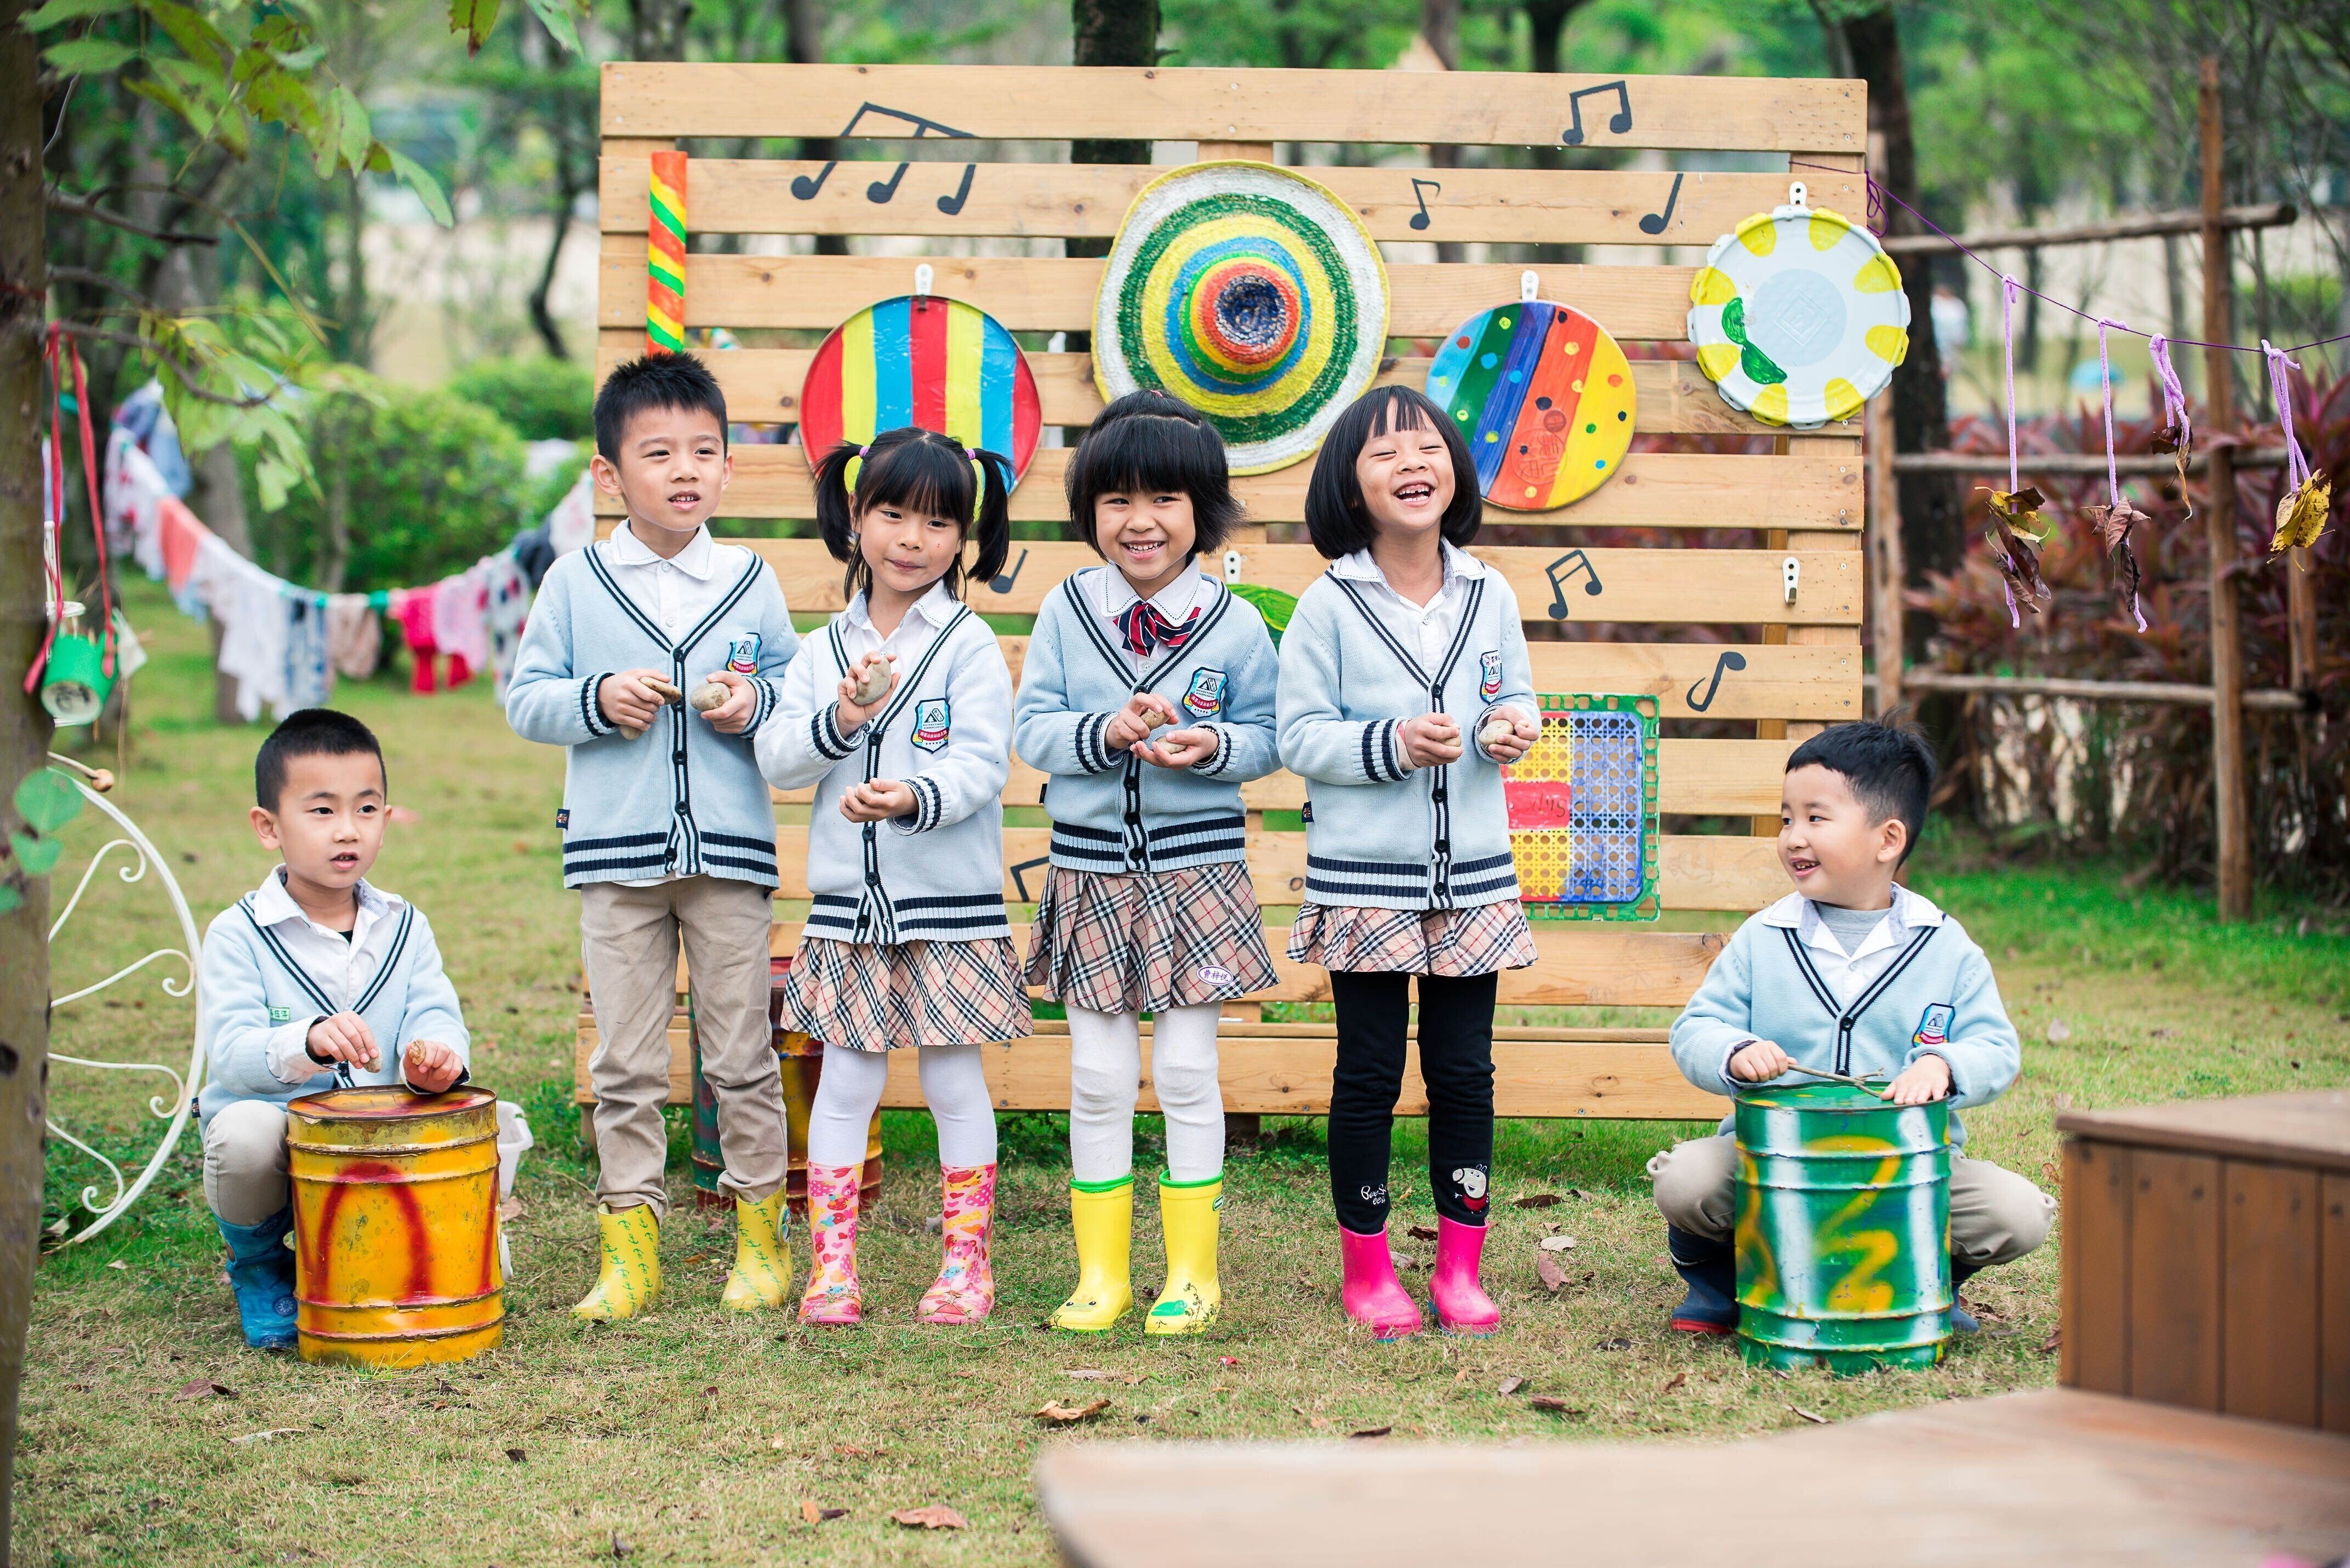 Rockies Forest Kindergarten in Zhongshan, Guangdong province, offers a nature-based curriculum for children. Photo: Handout